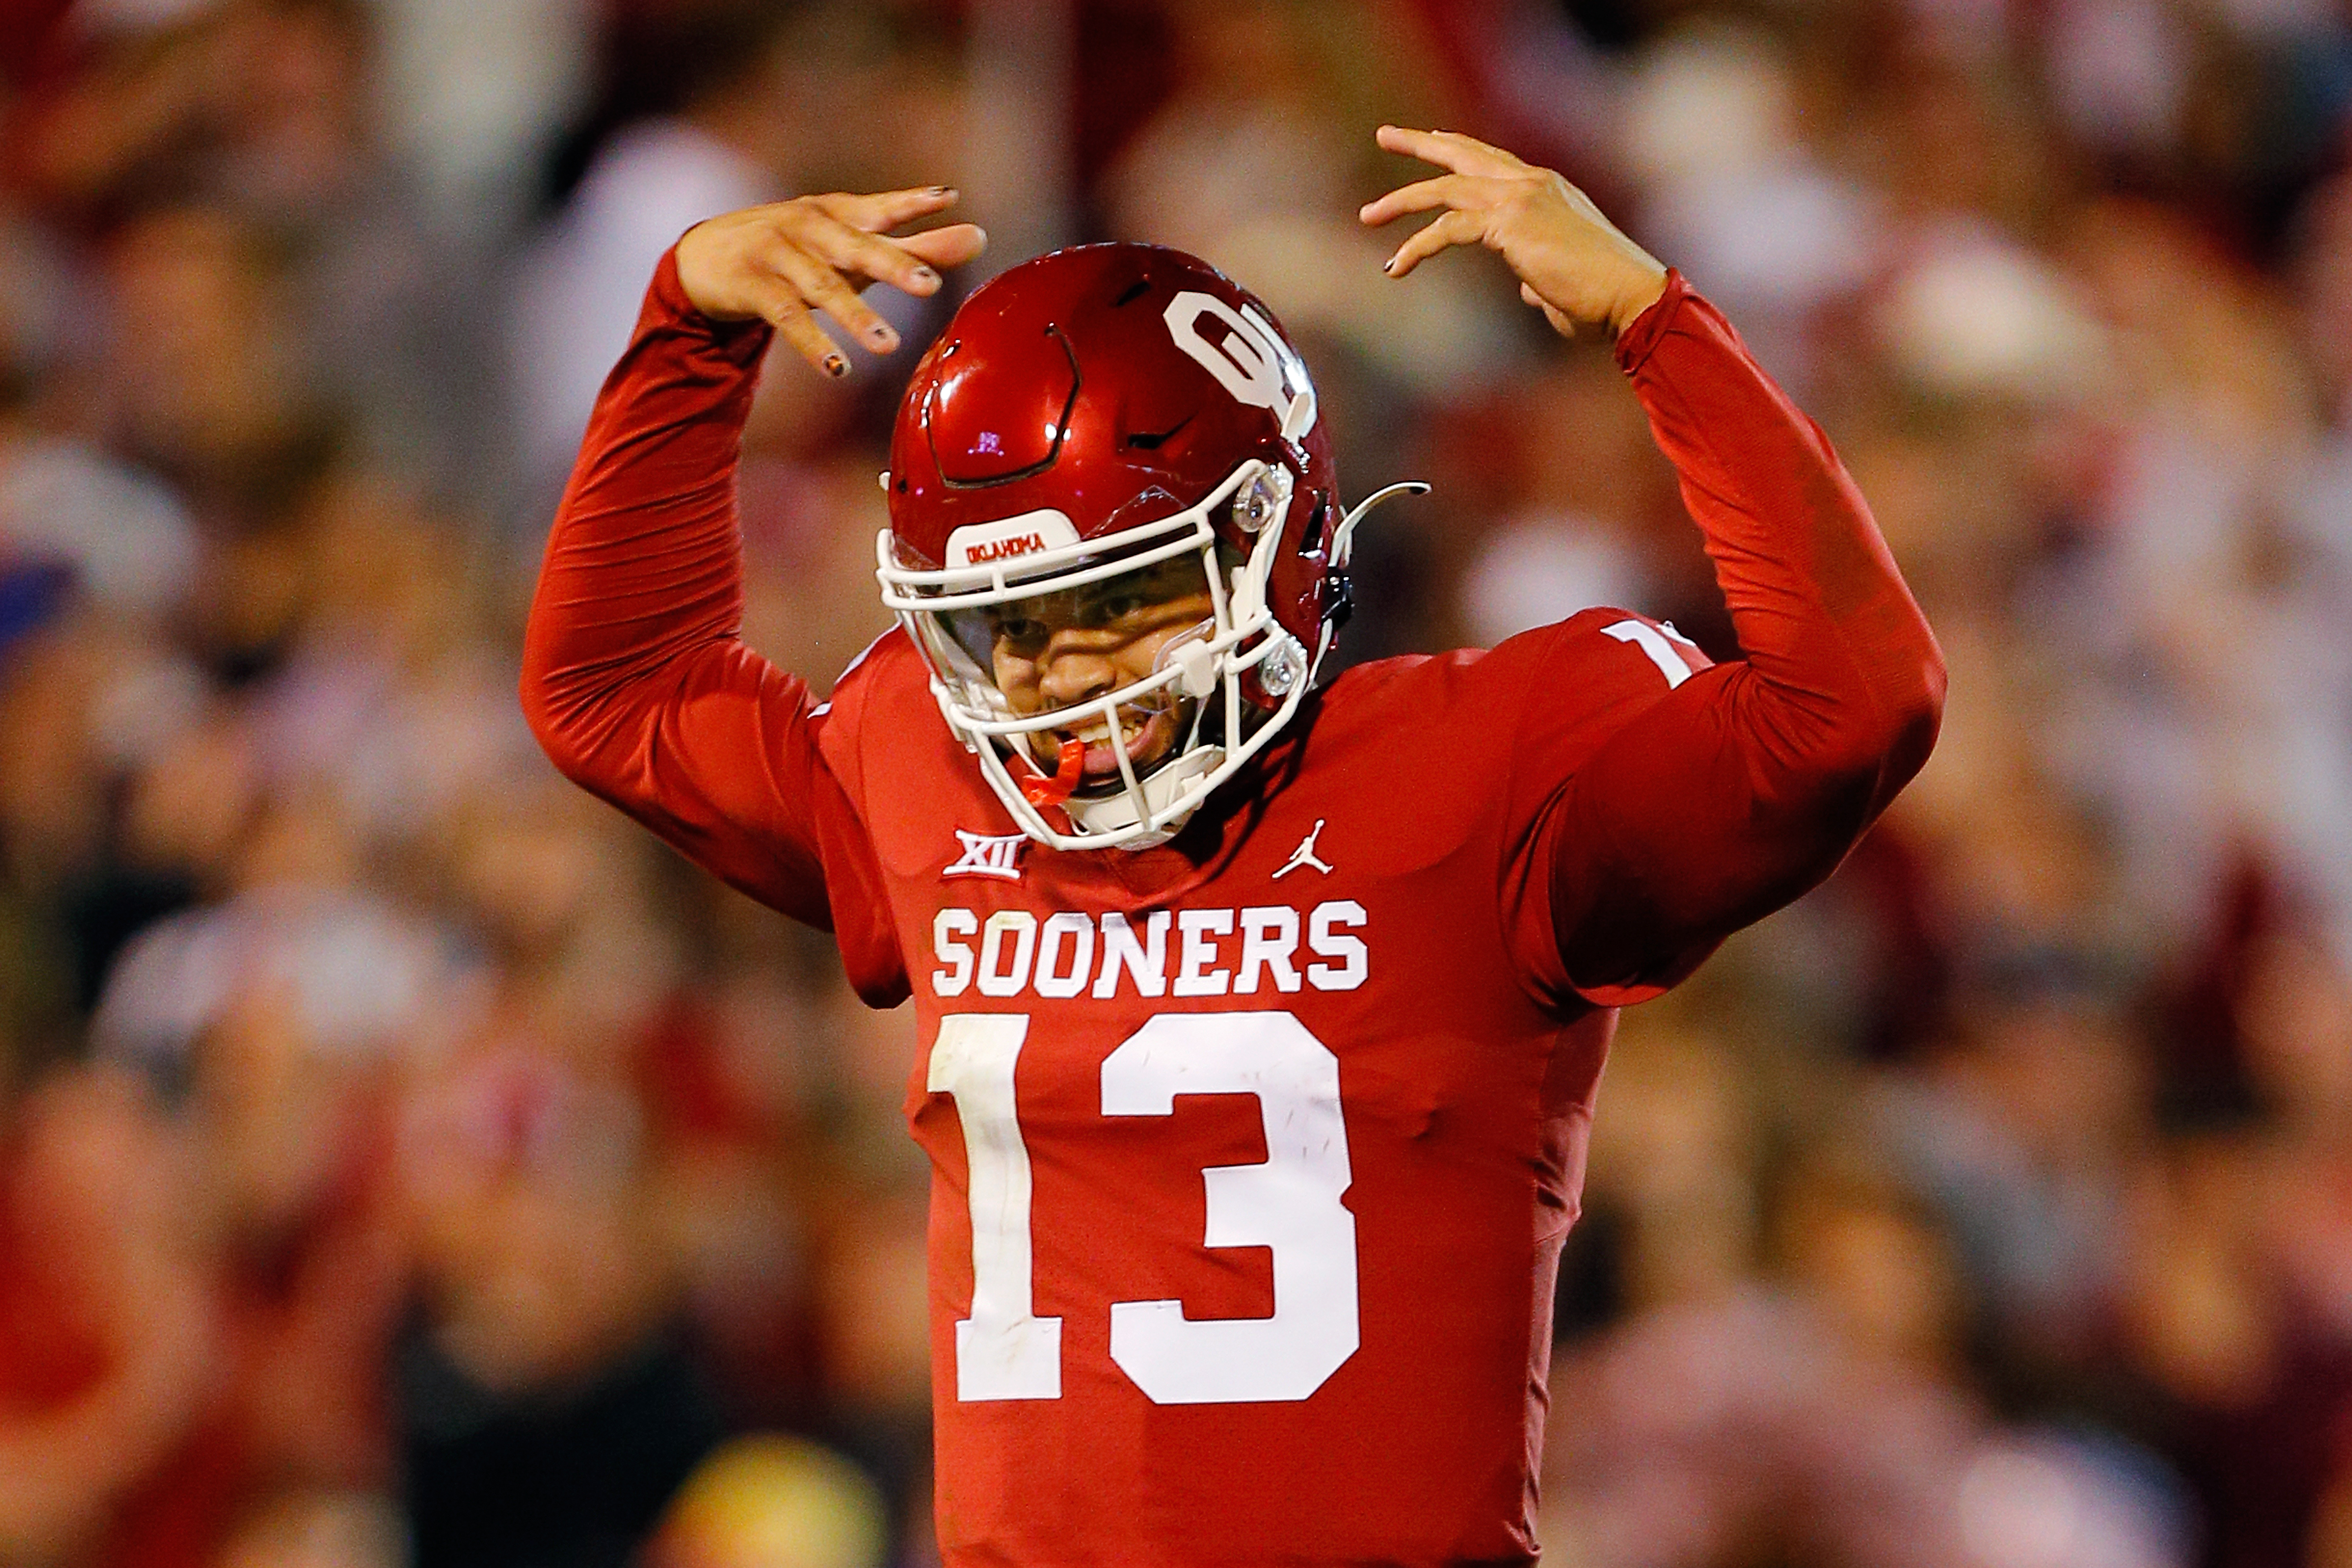 Oklahoma vs Kansas Point Spread, Over/Under, Moneyline and Betting Trends for College Football Week 8